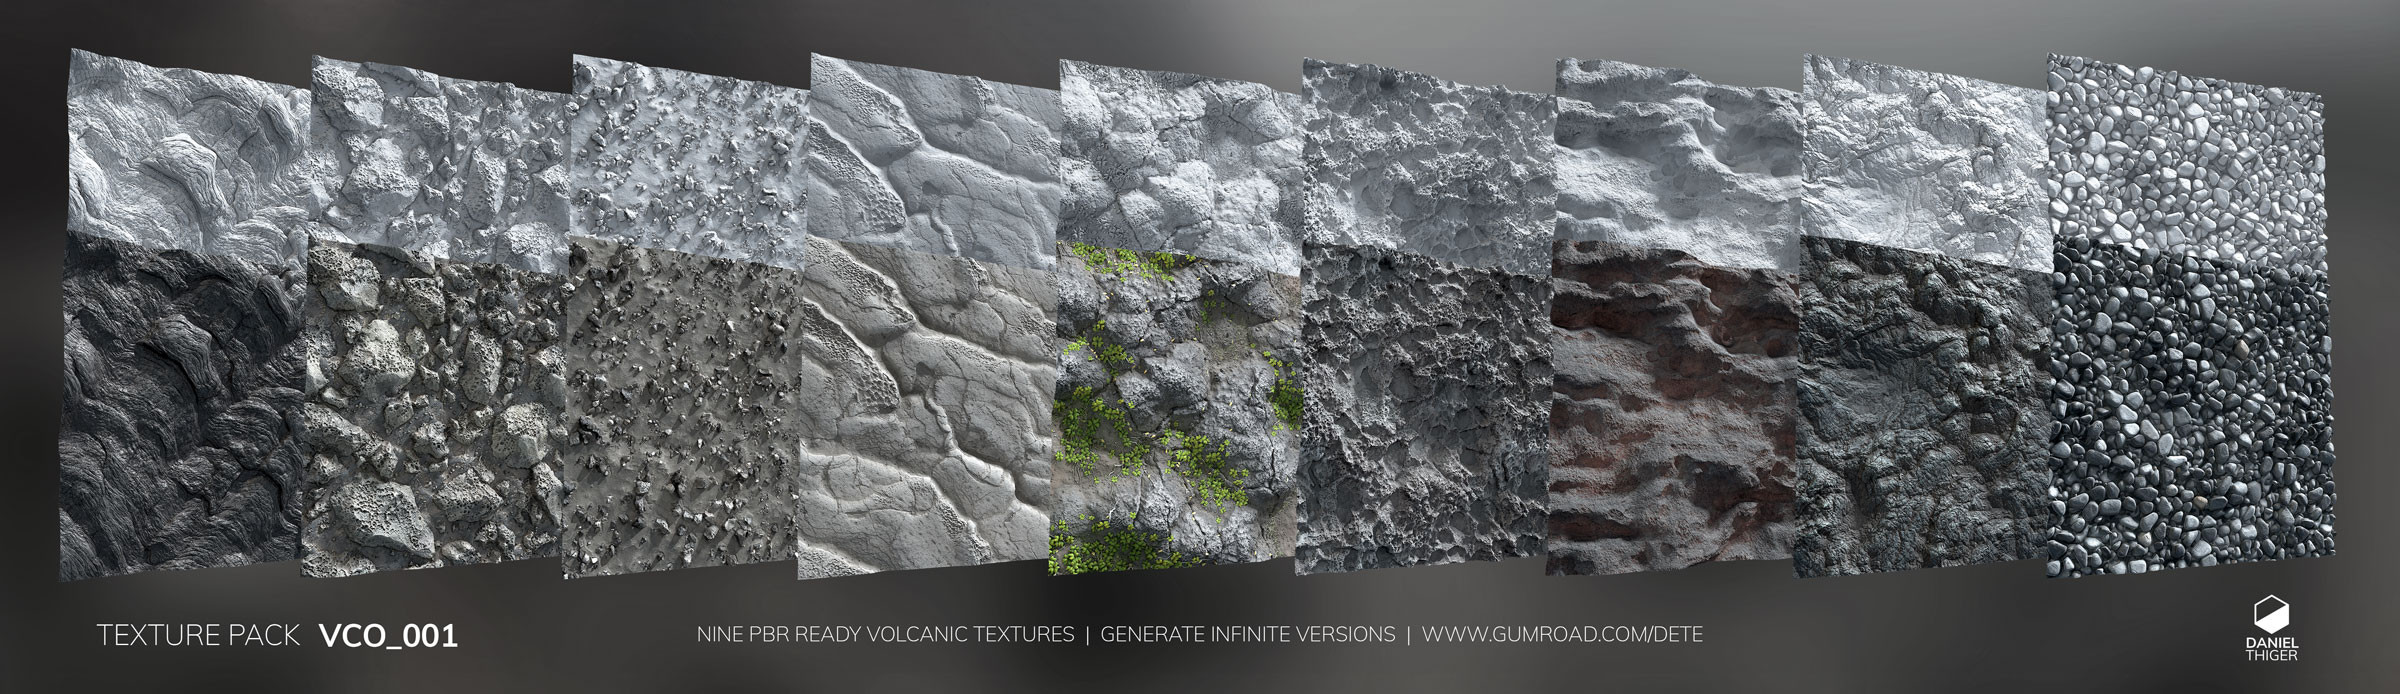 ArtStation - Old Texture pack project